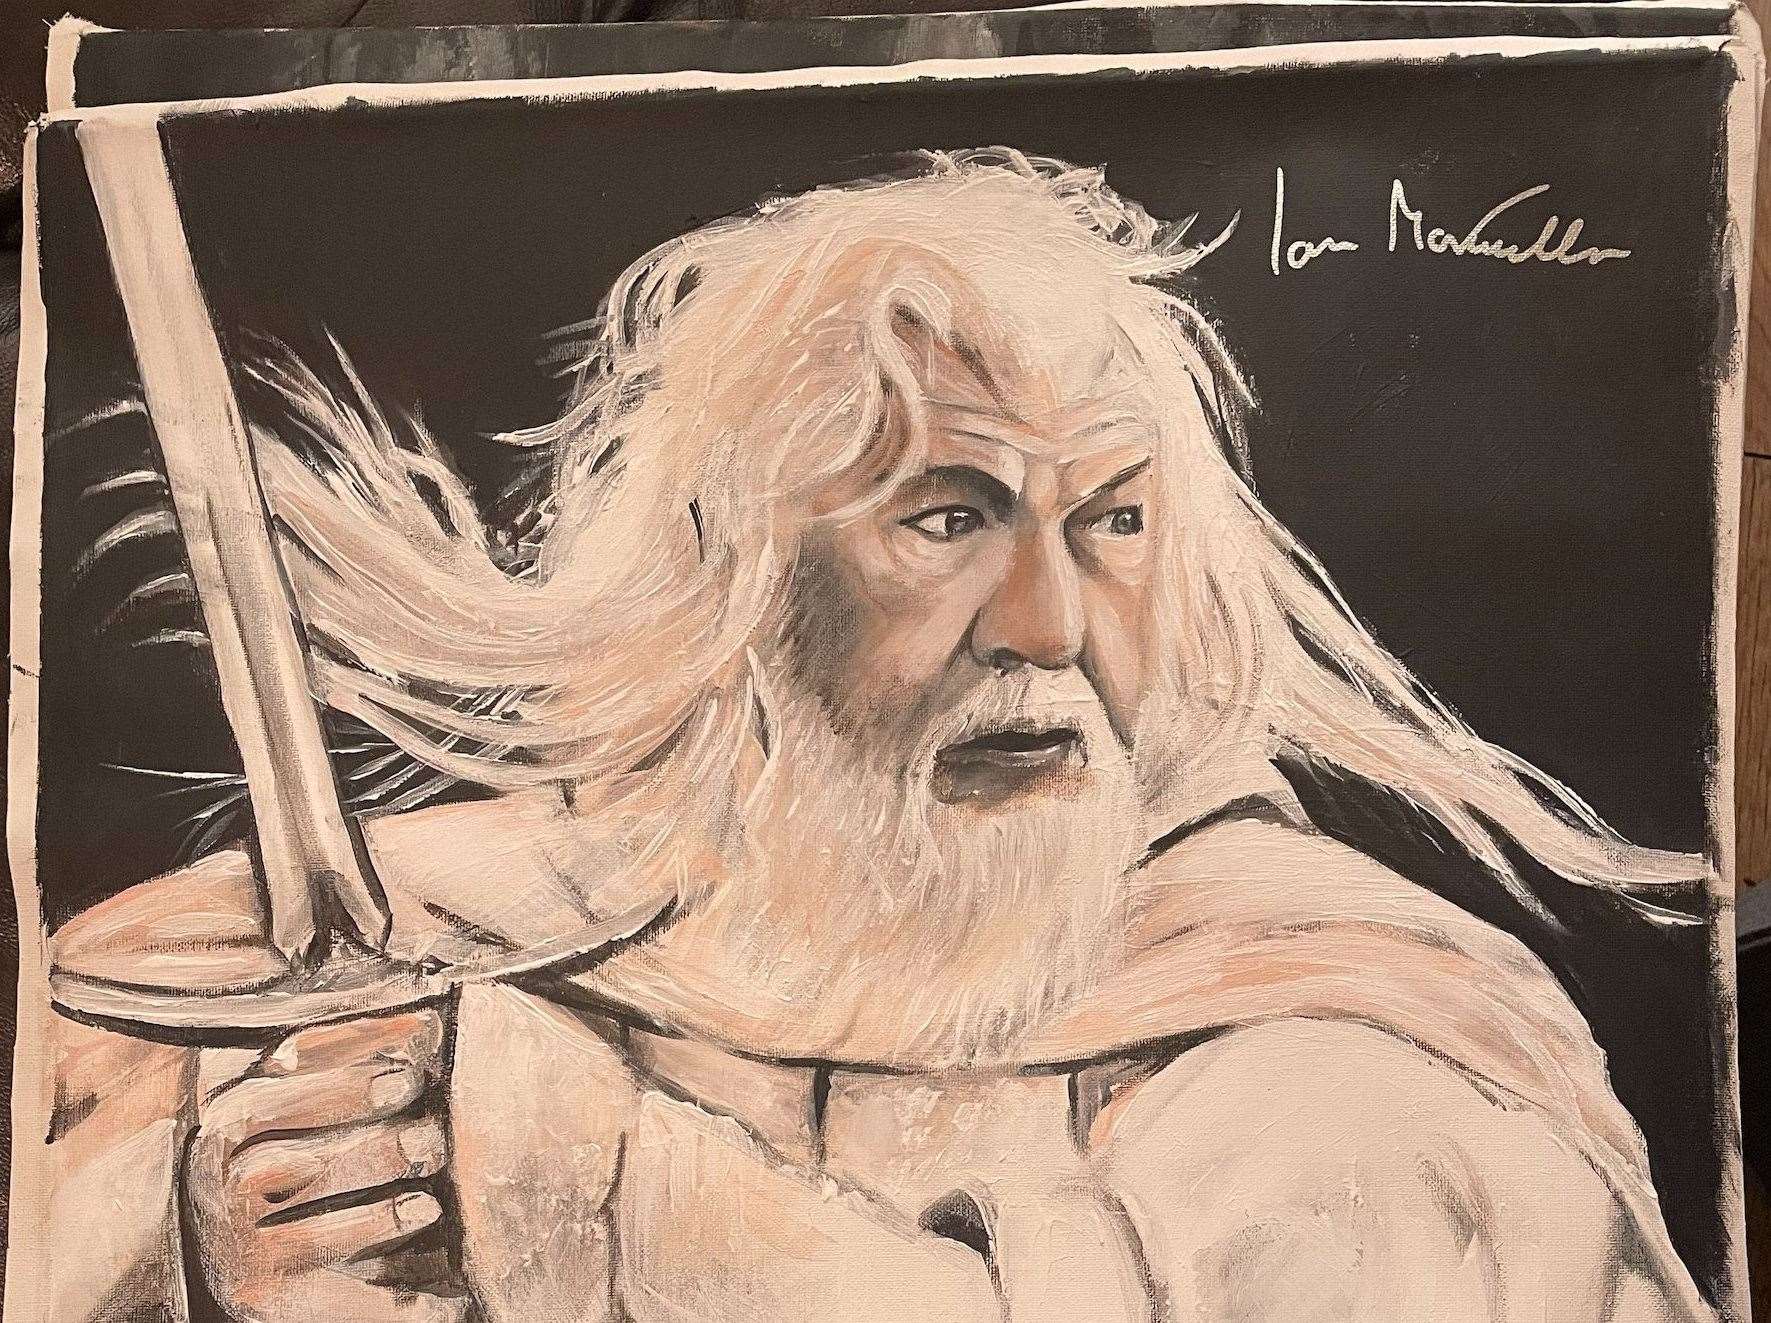 Sir Ian McKellen artwork signed by the 'imposter'. Picture: SWNS